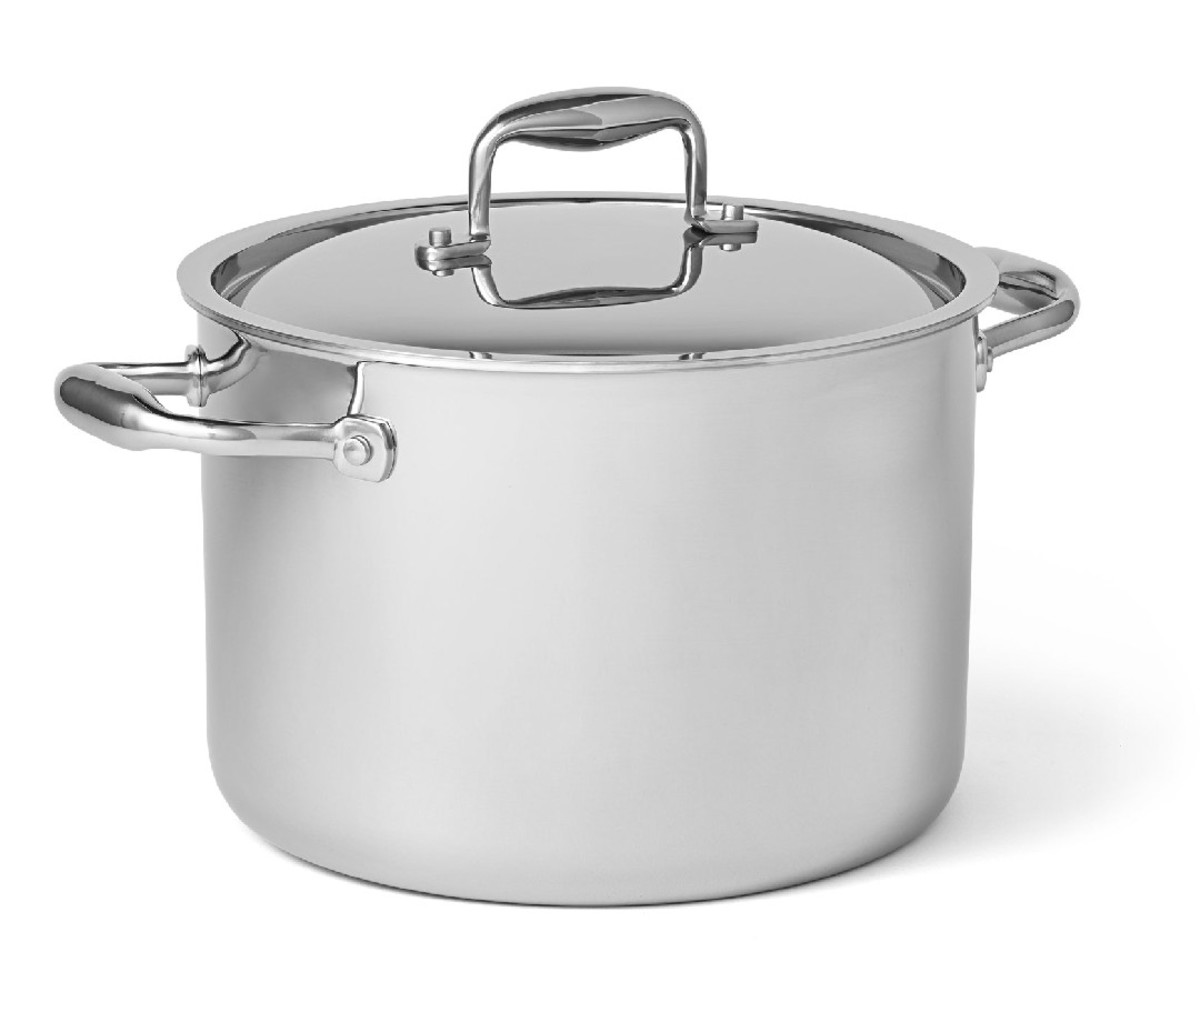 Chrome Brandless 8-Quart Stainless Steel Stock Pot with Lid